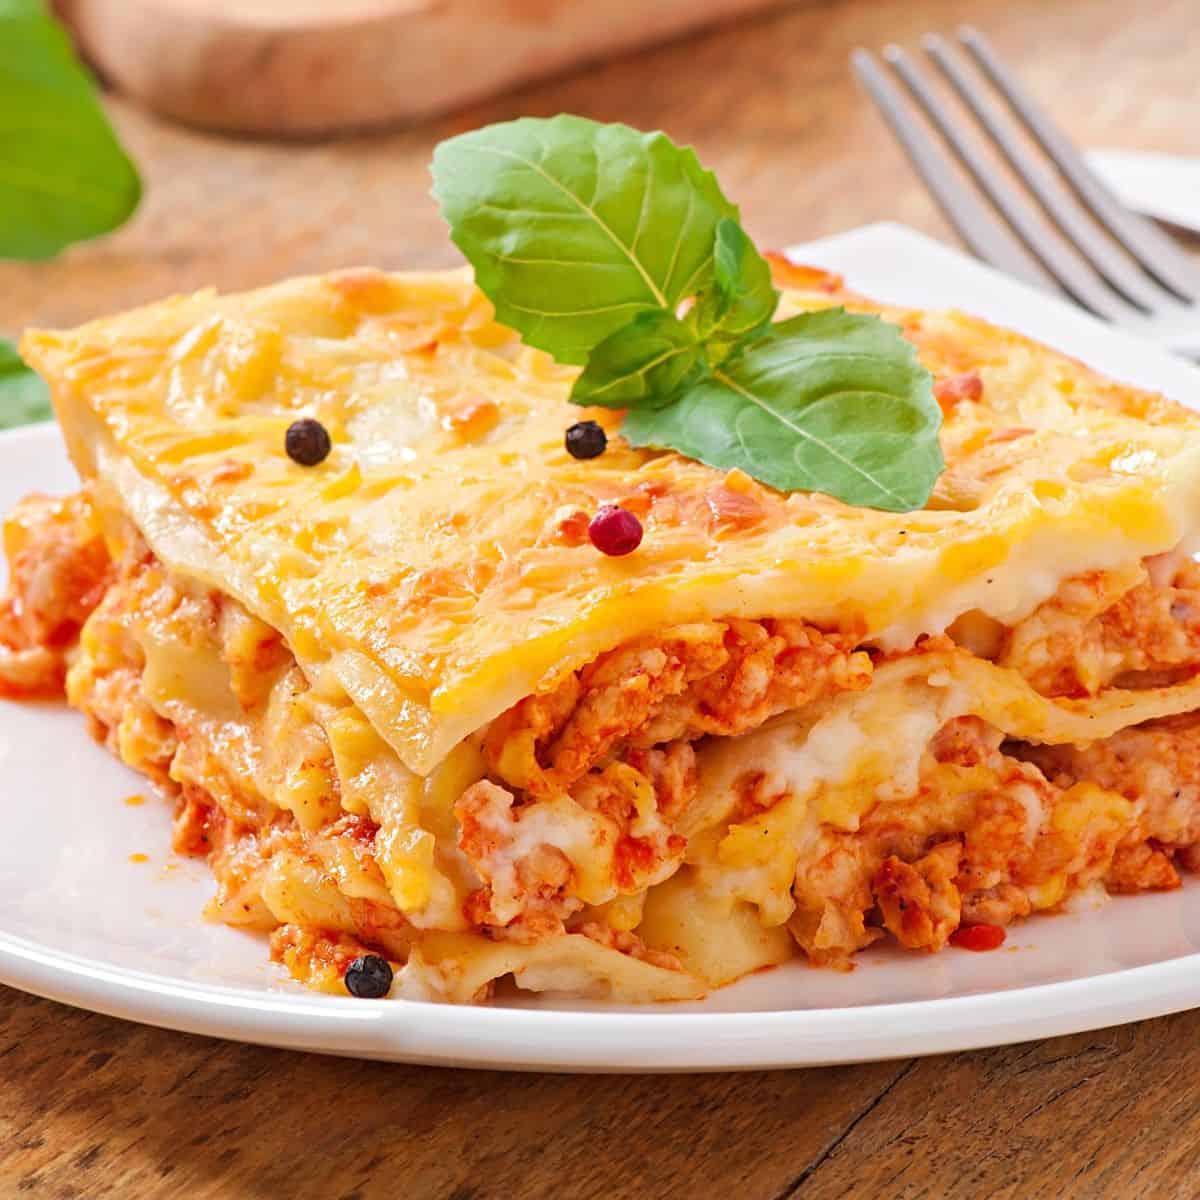 A plate of lasagna from Bologna on a wooden table.